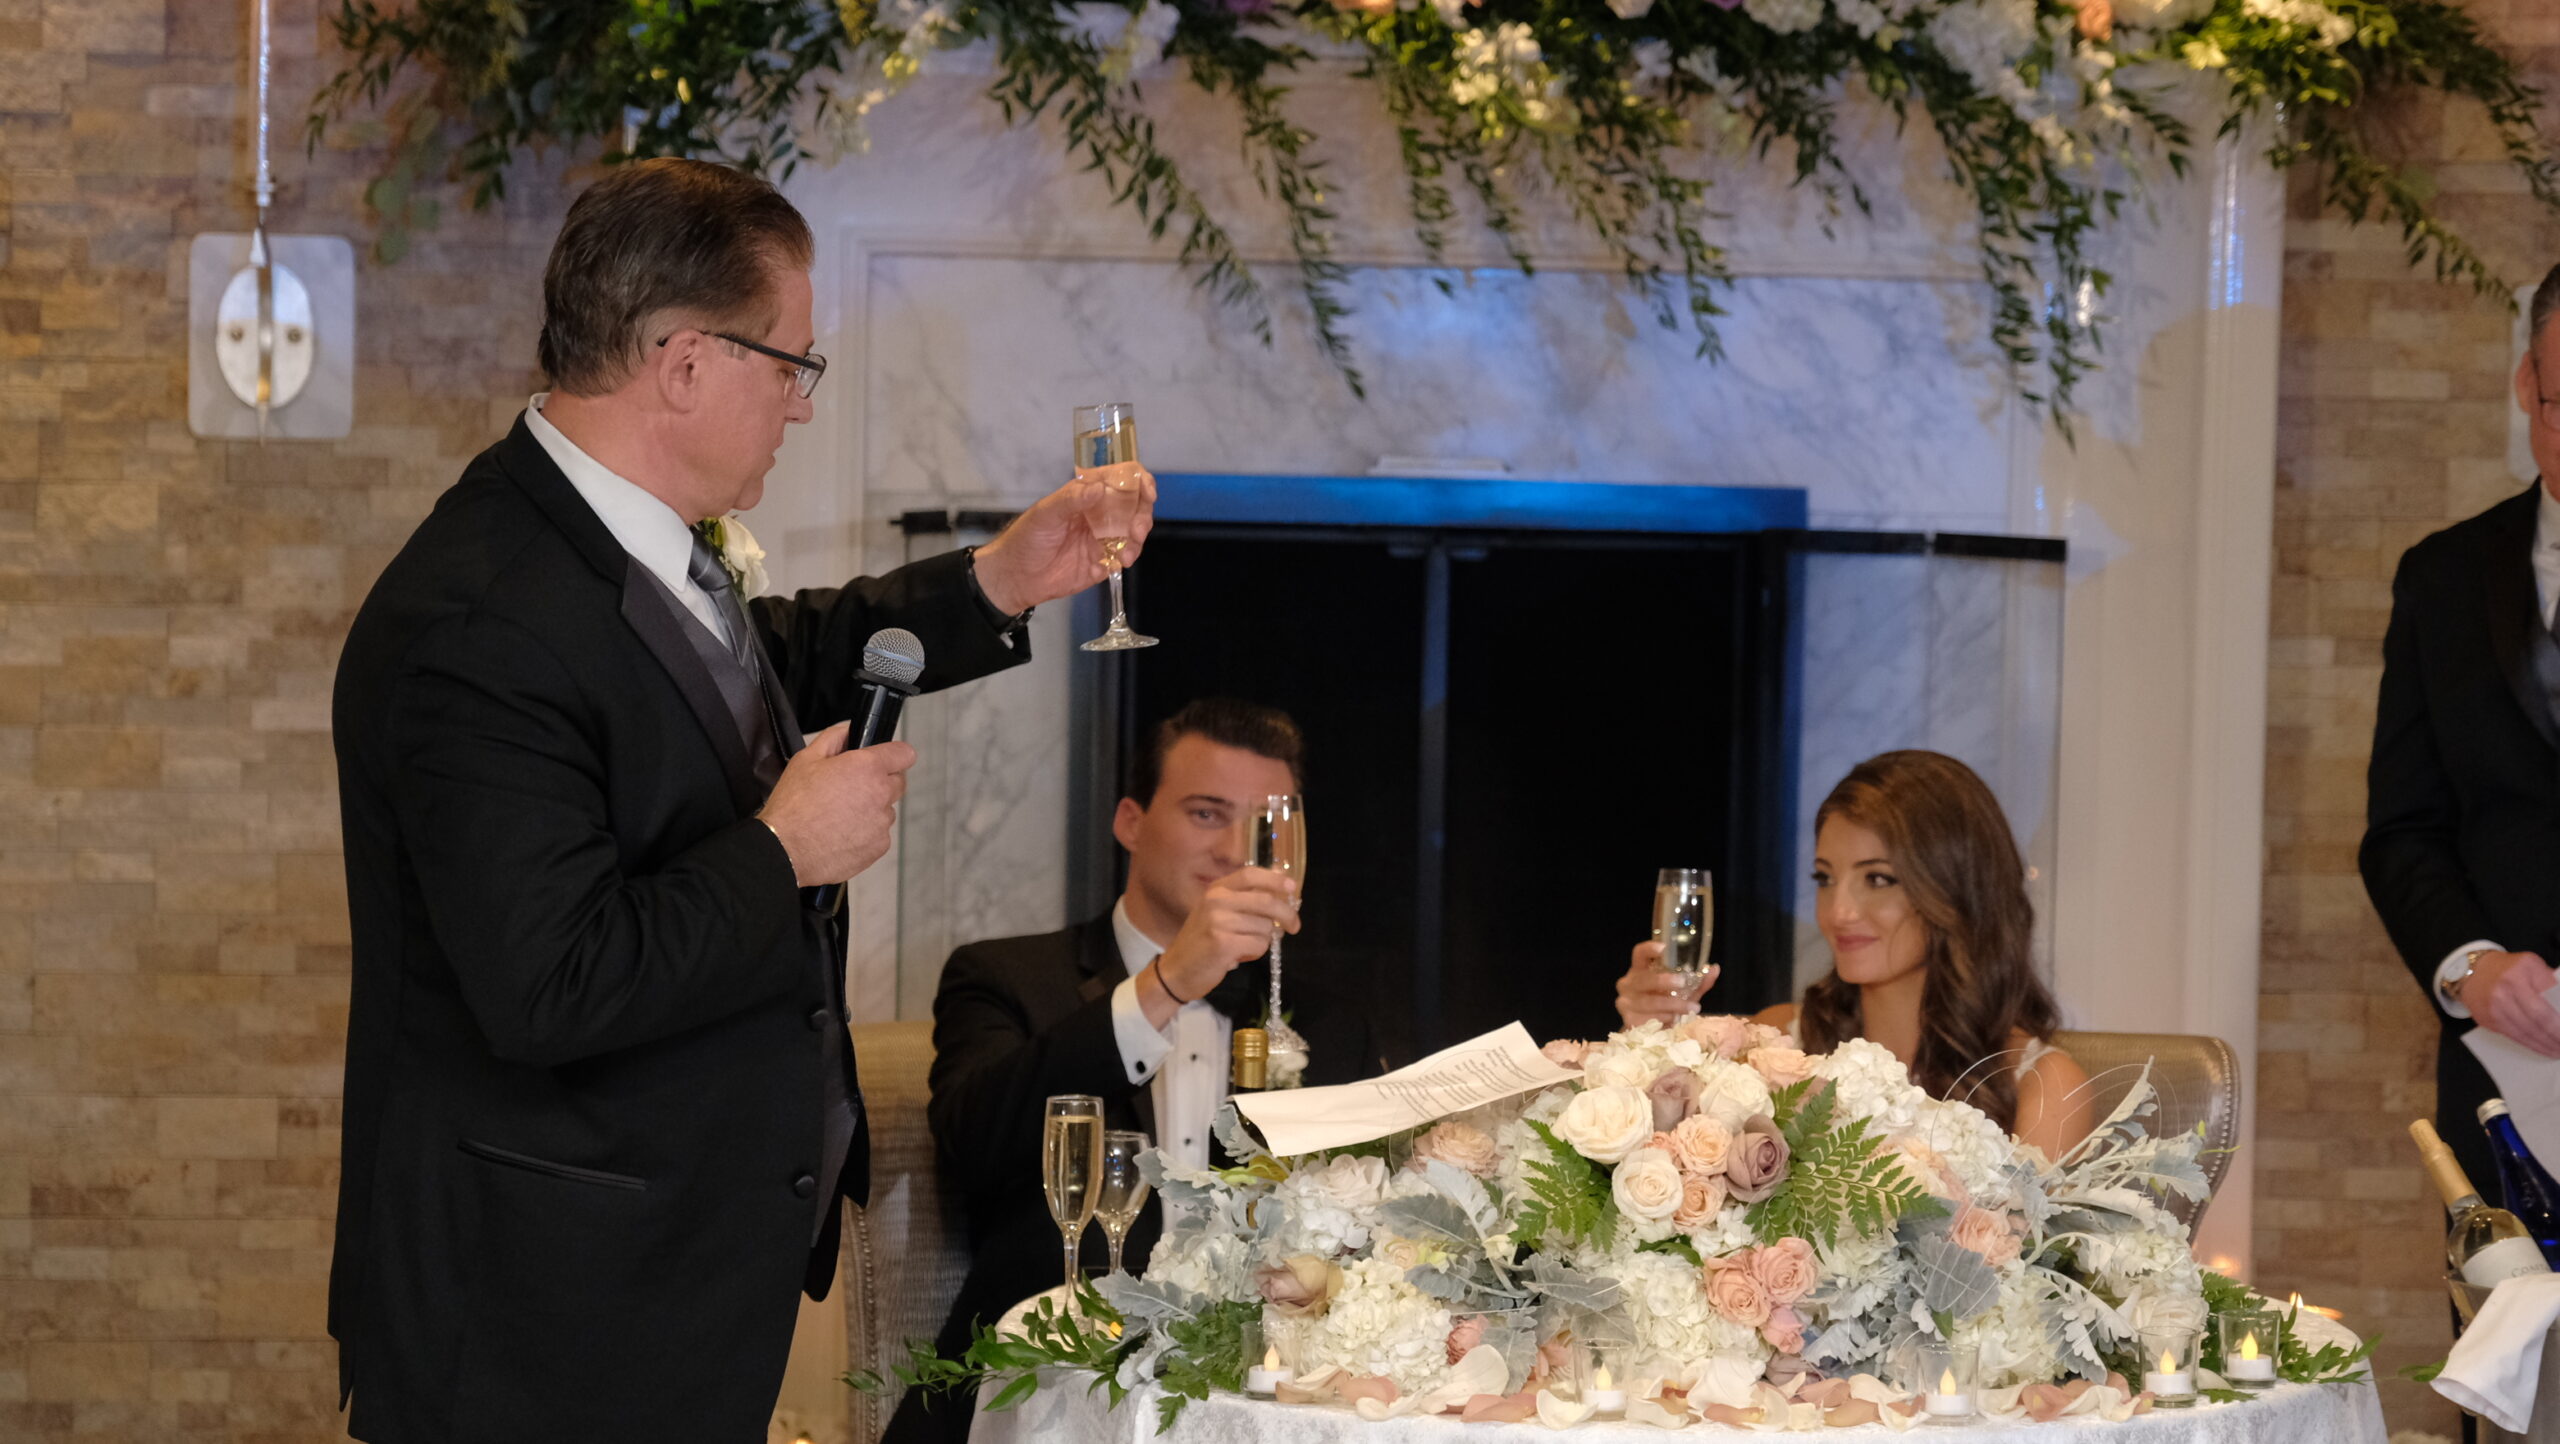 Wedding Speeches: Tips for the Perfect Speech